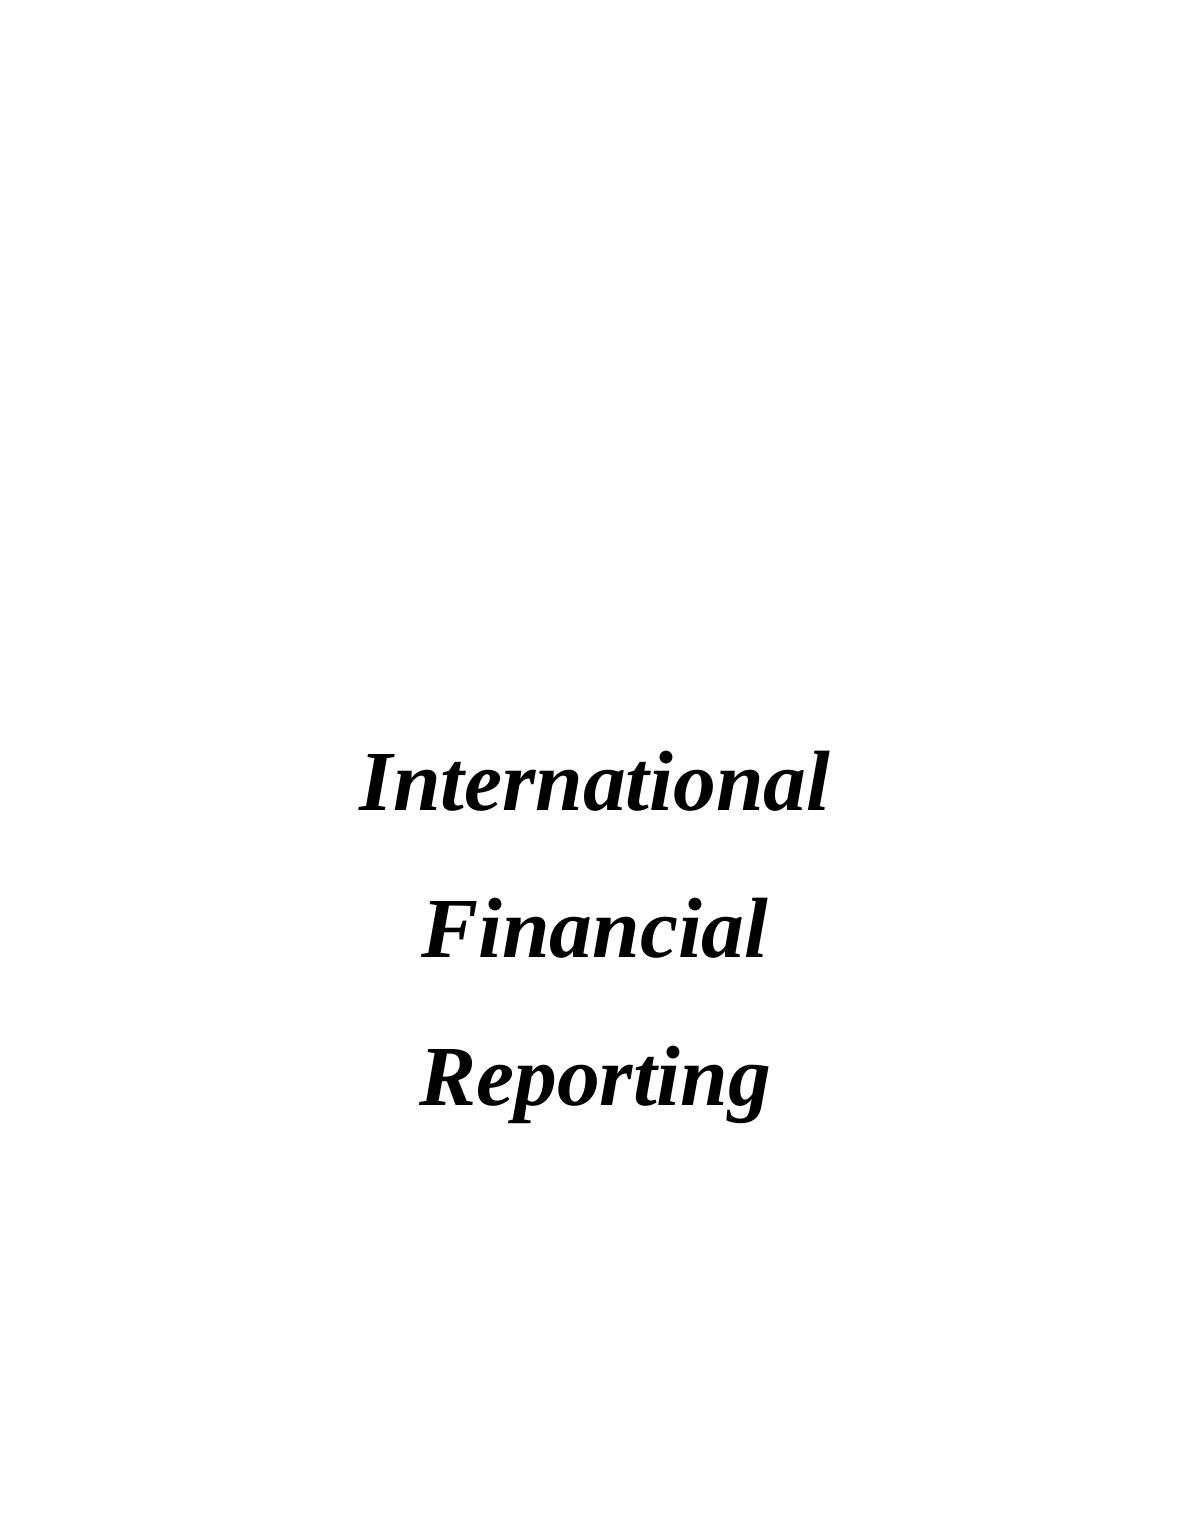 International Financial Reporting: Conceptual Framework, First Time Adoption, Lease_1